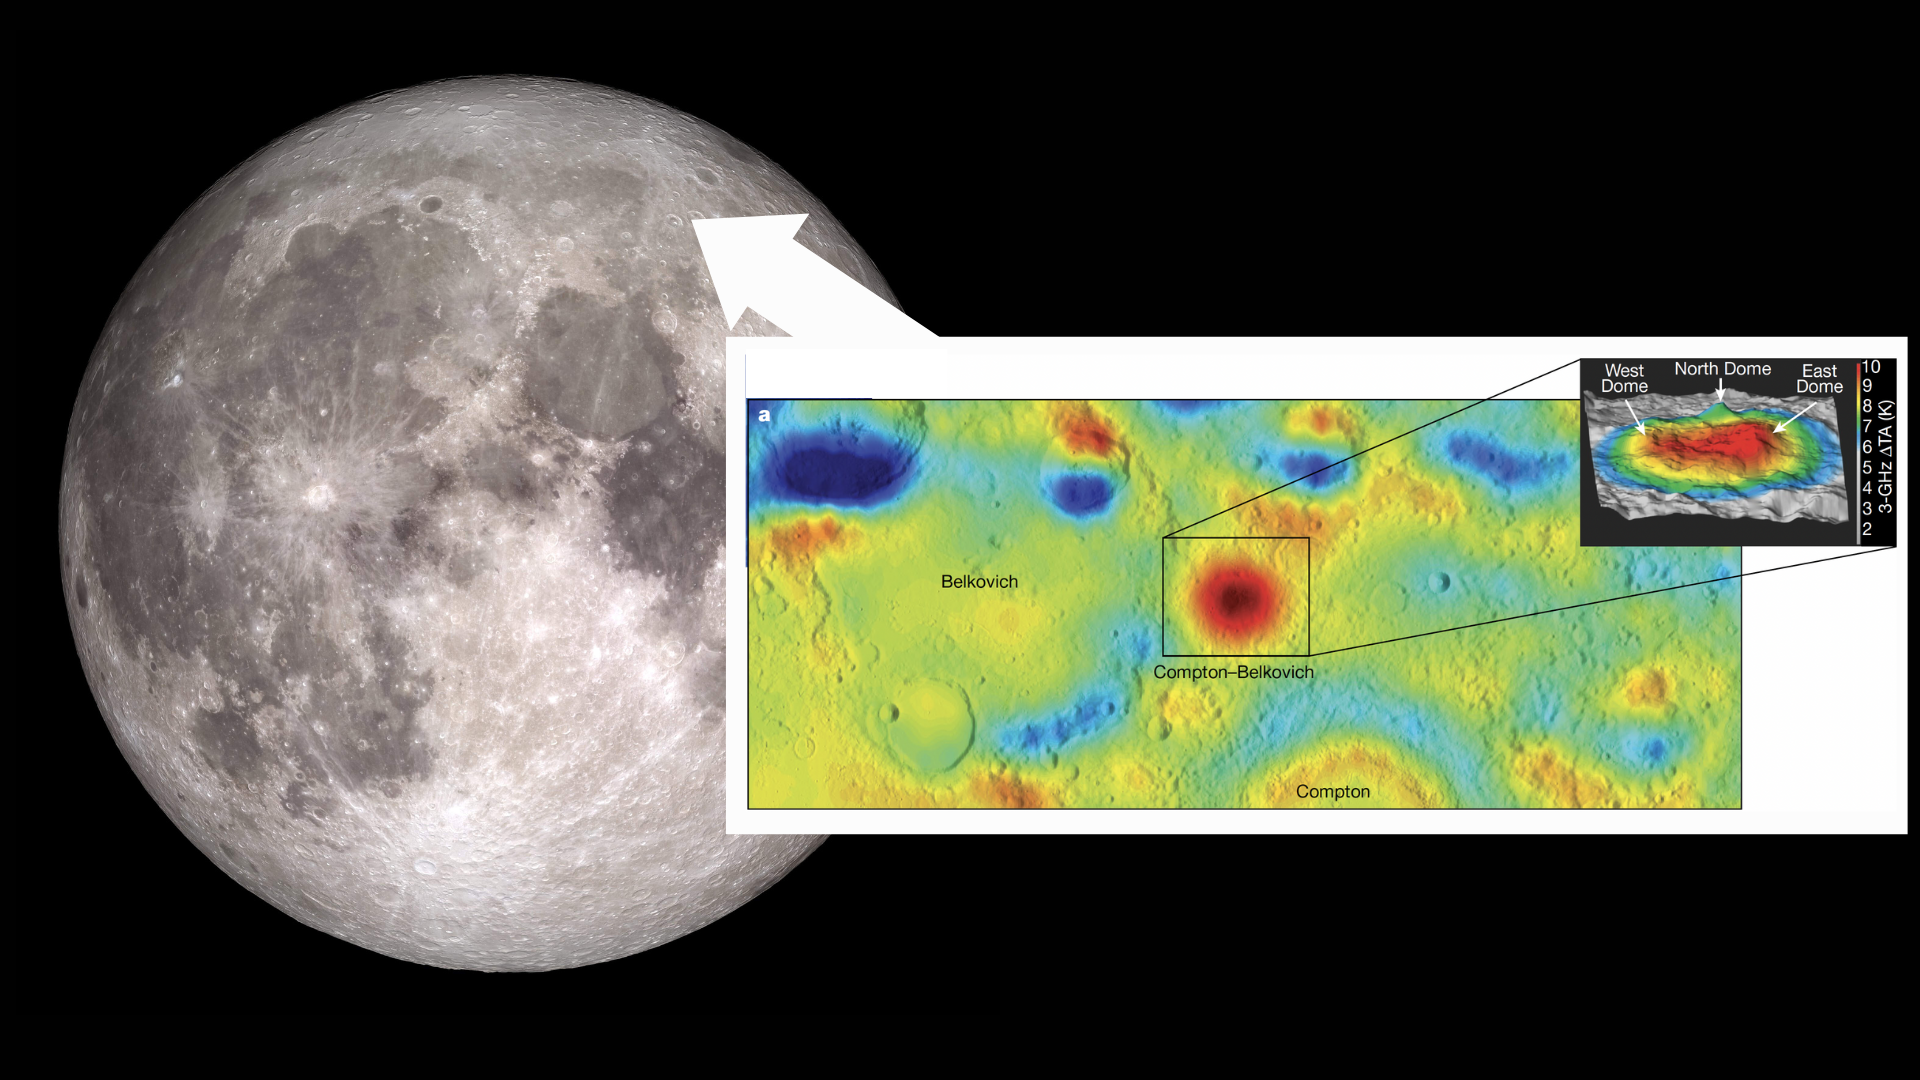 a photograph of the moon with an inset showing a heat map of a small area on its northern hemisphere